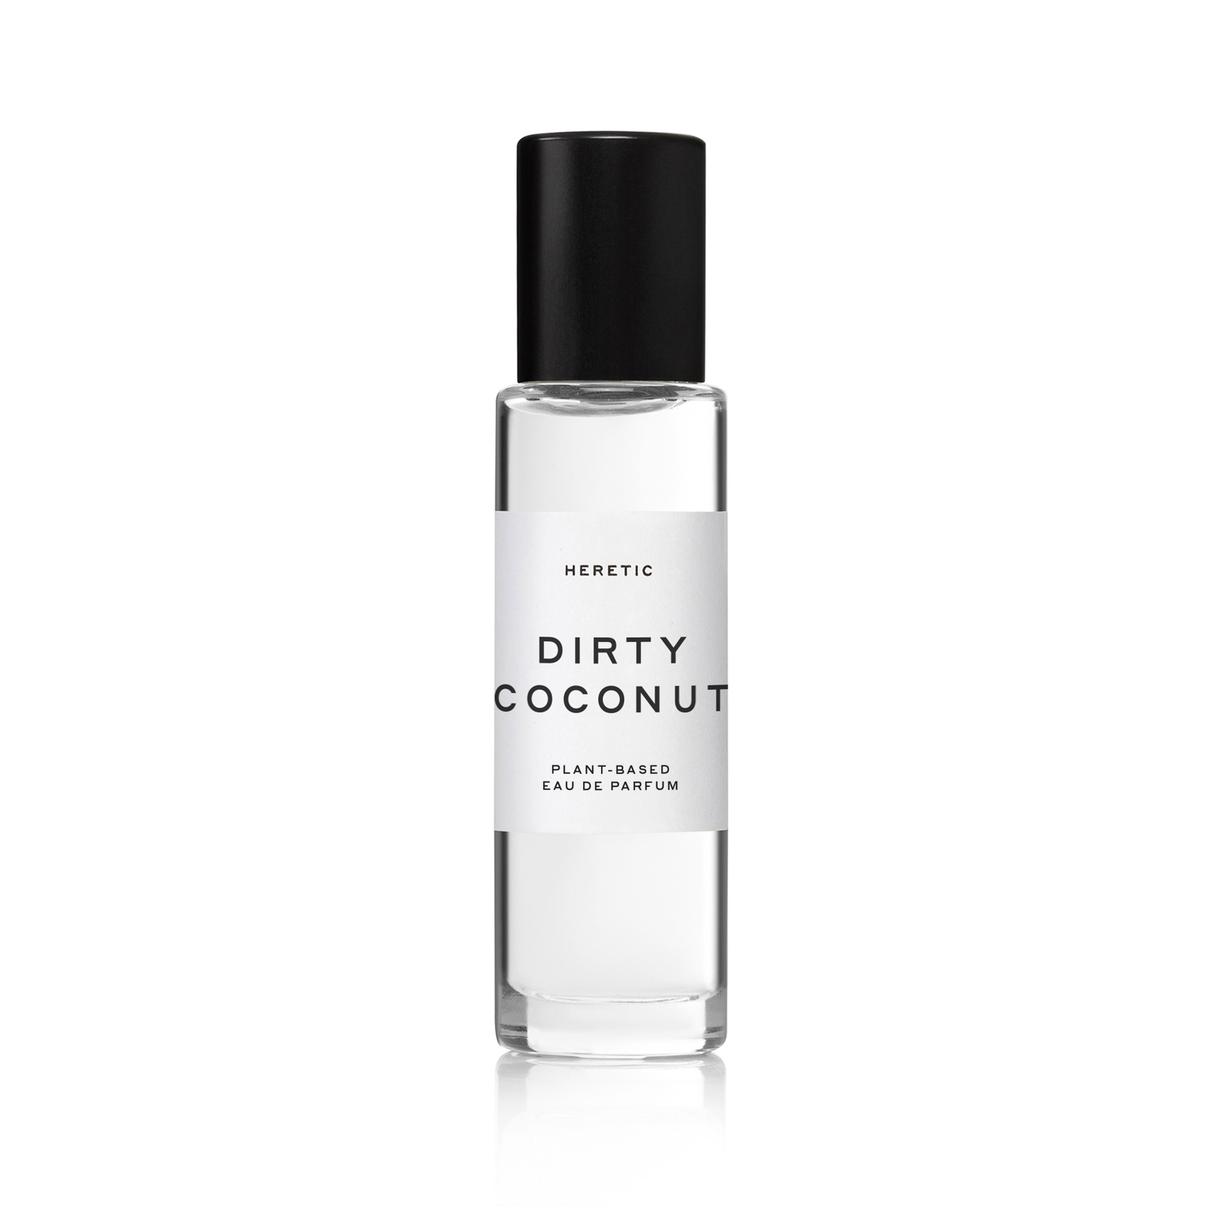 Heretic Dirty Coconut, 15 mL